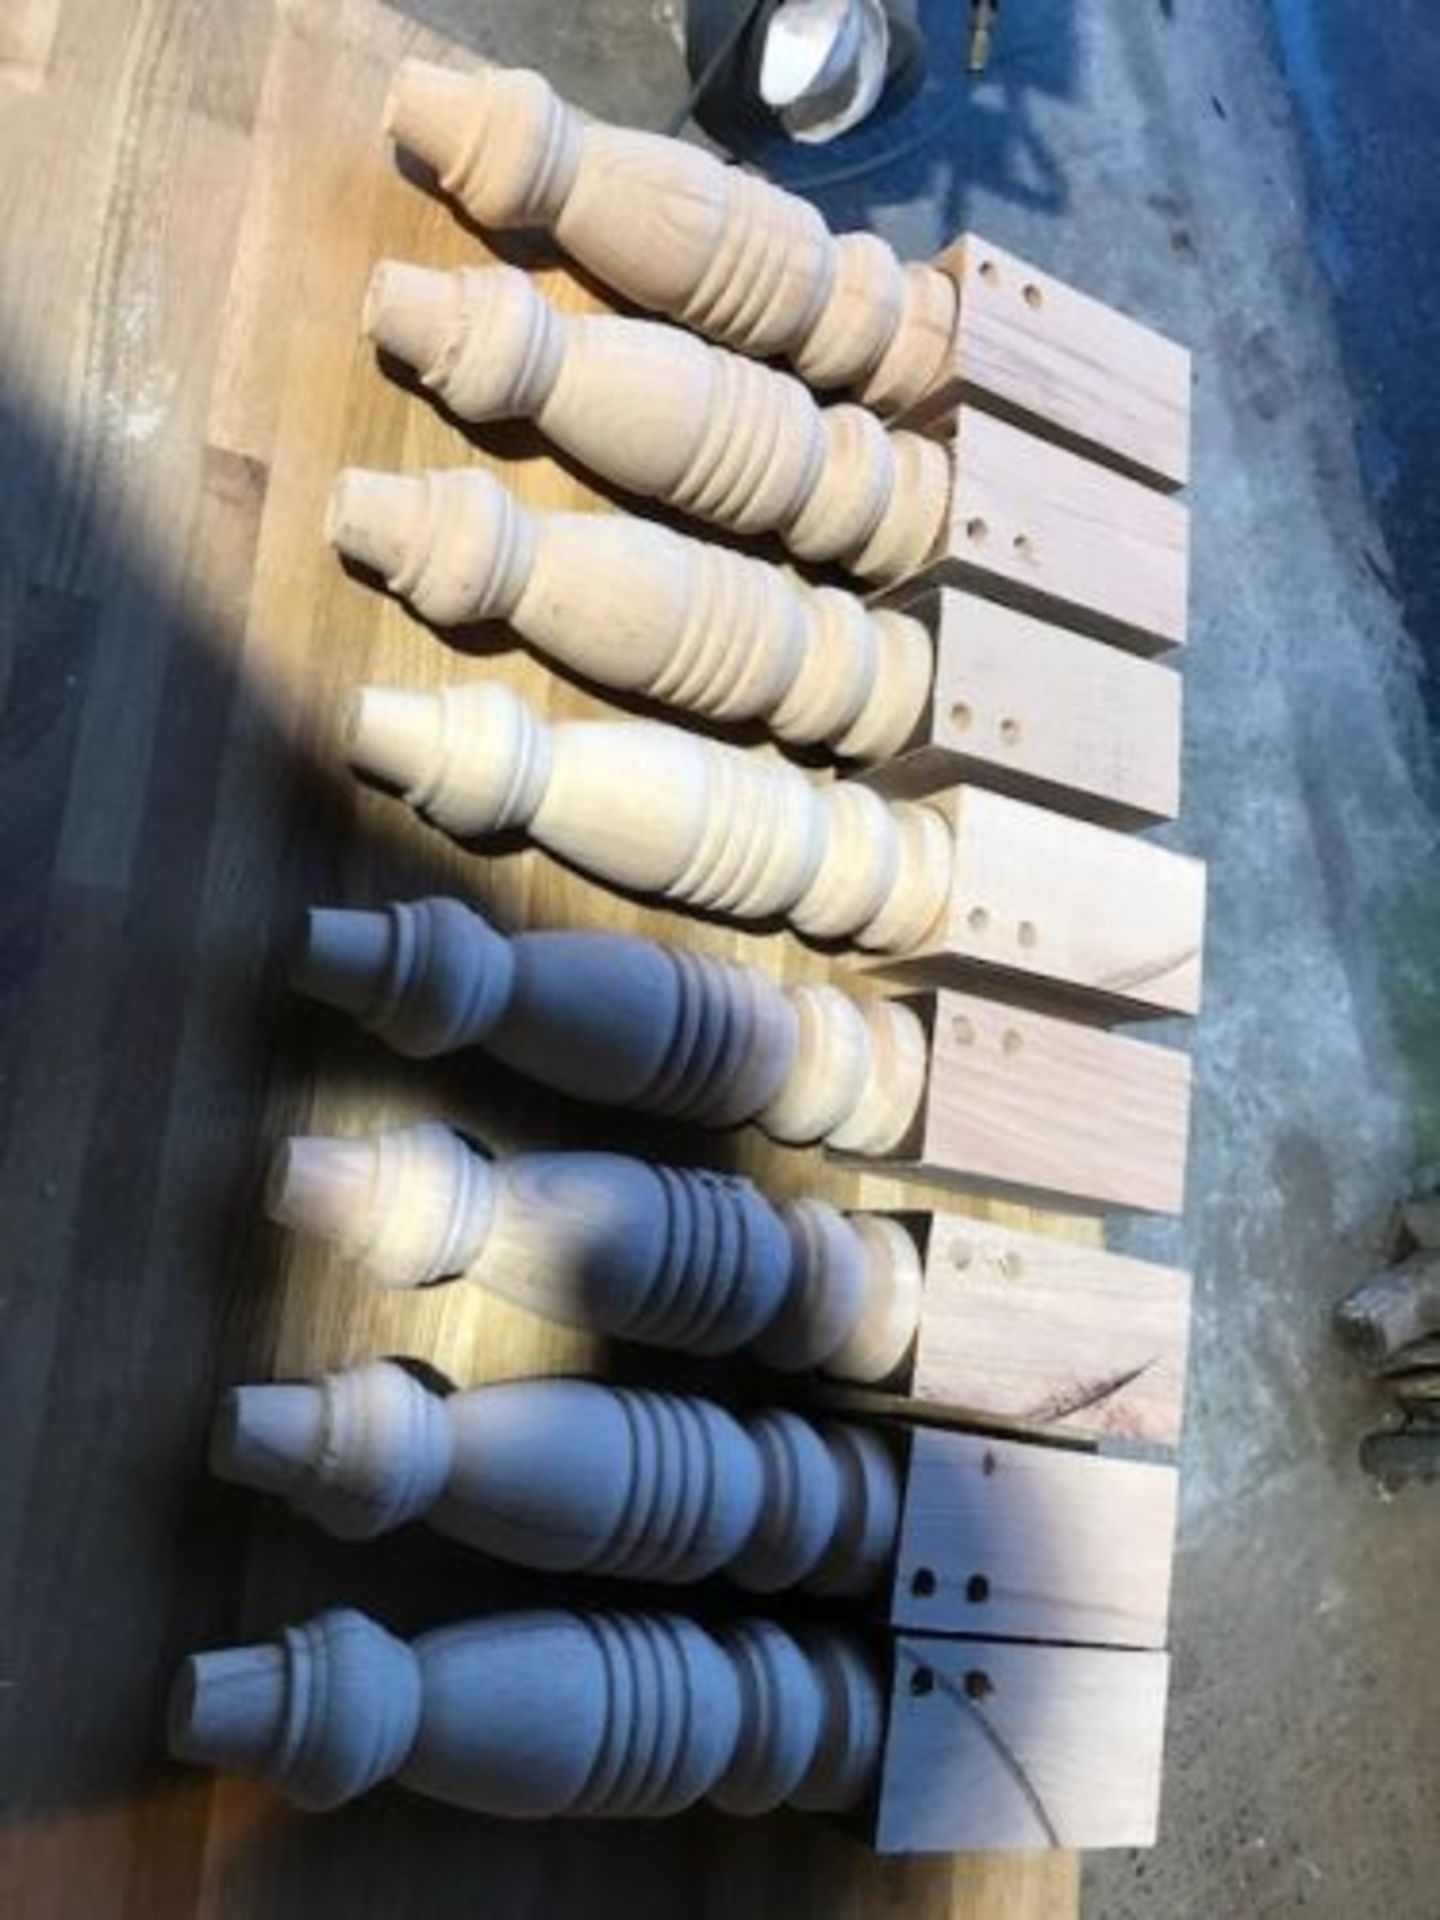 8 Chair legs 13" unstained